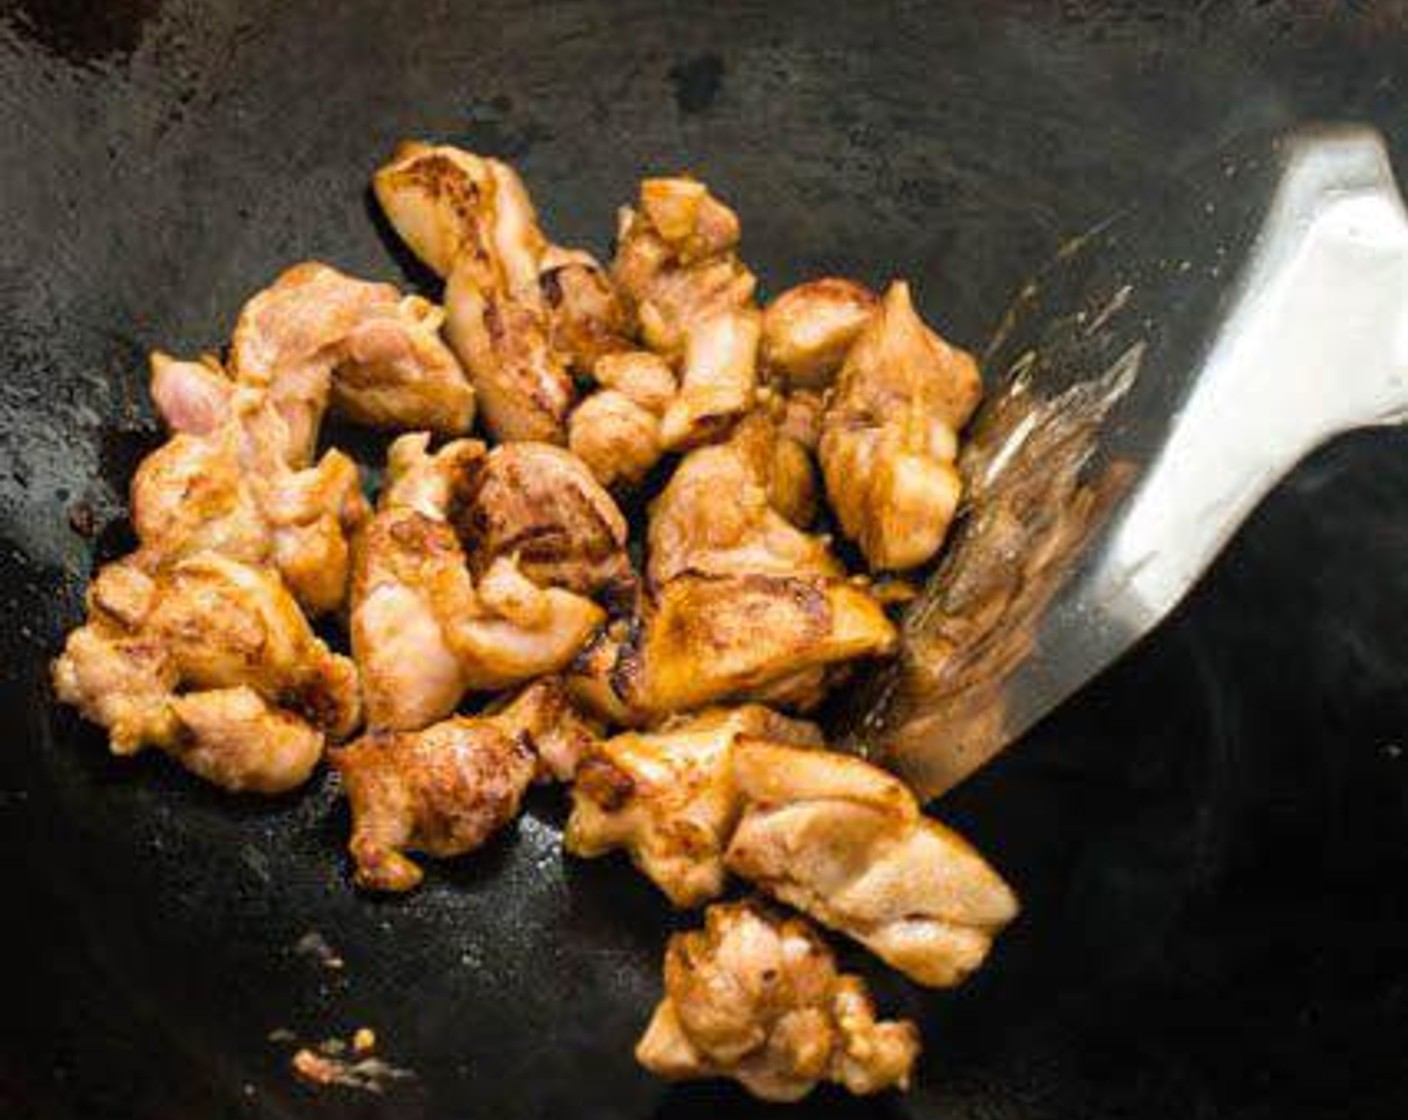 step 6 Heat Cooking Oil (1 Tbsp) in a wok over medium-high heat. Add the chicken and stir-fry until fully cooked. Remove from wok and set aside.